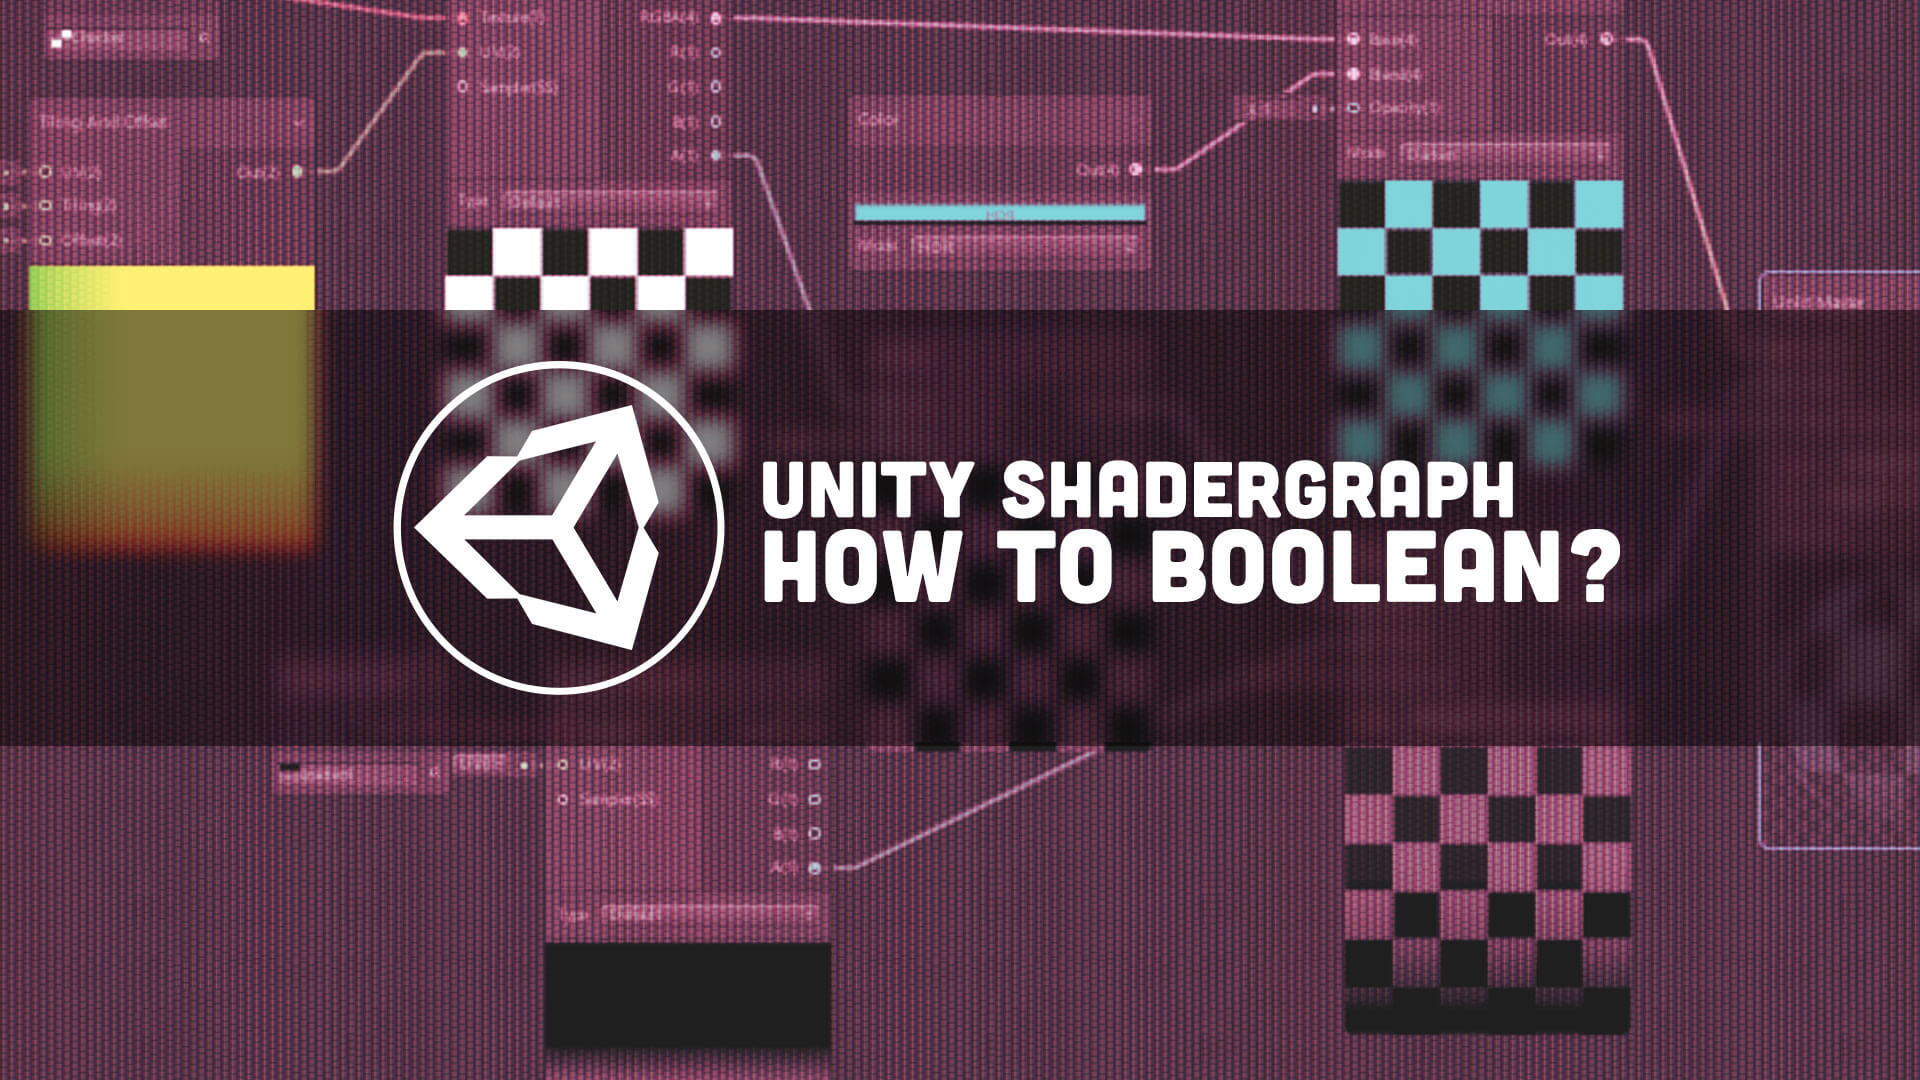 Unity Shadergraph: How to properly use booleans in a shader?